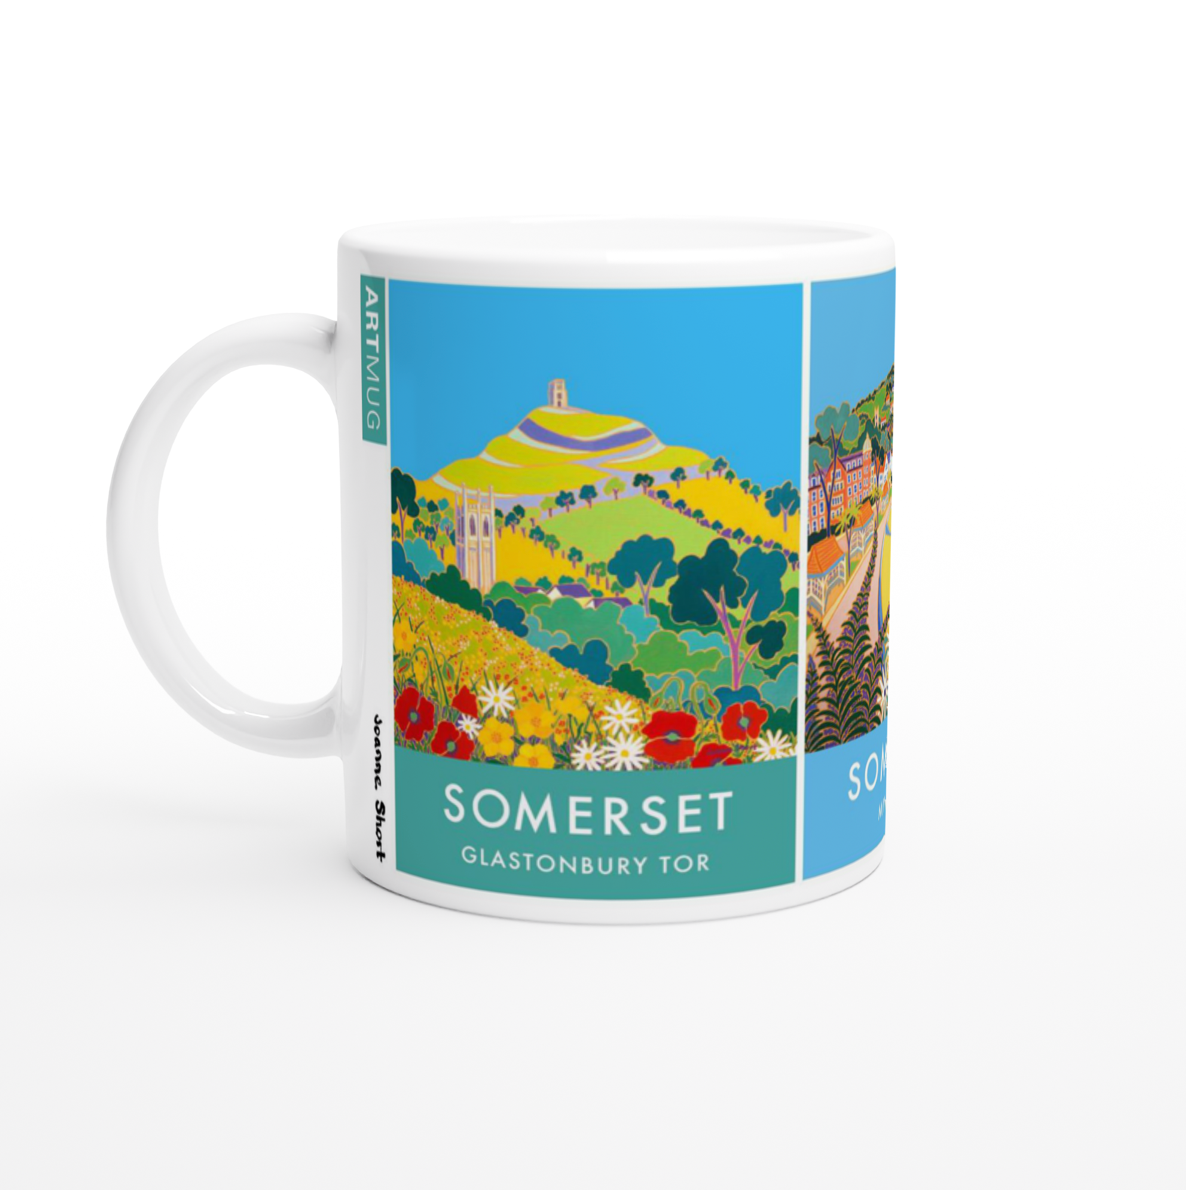 Art mug by artist Joanne Short featuring vintage style art posters of Somerset and Glastonbury.